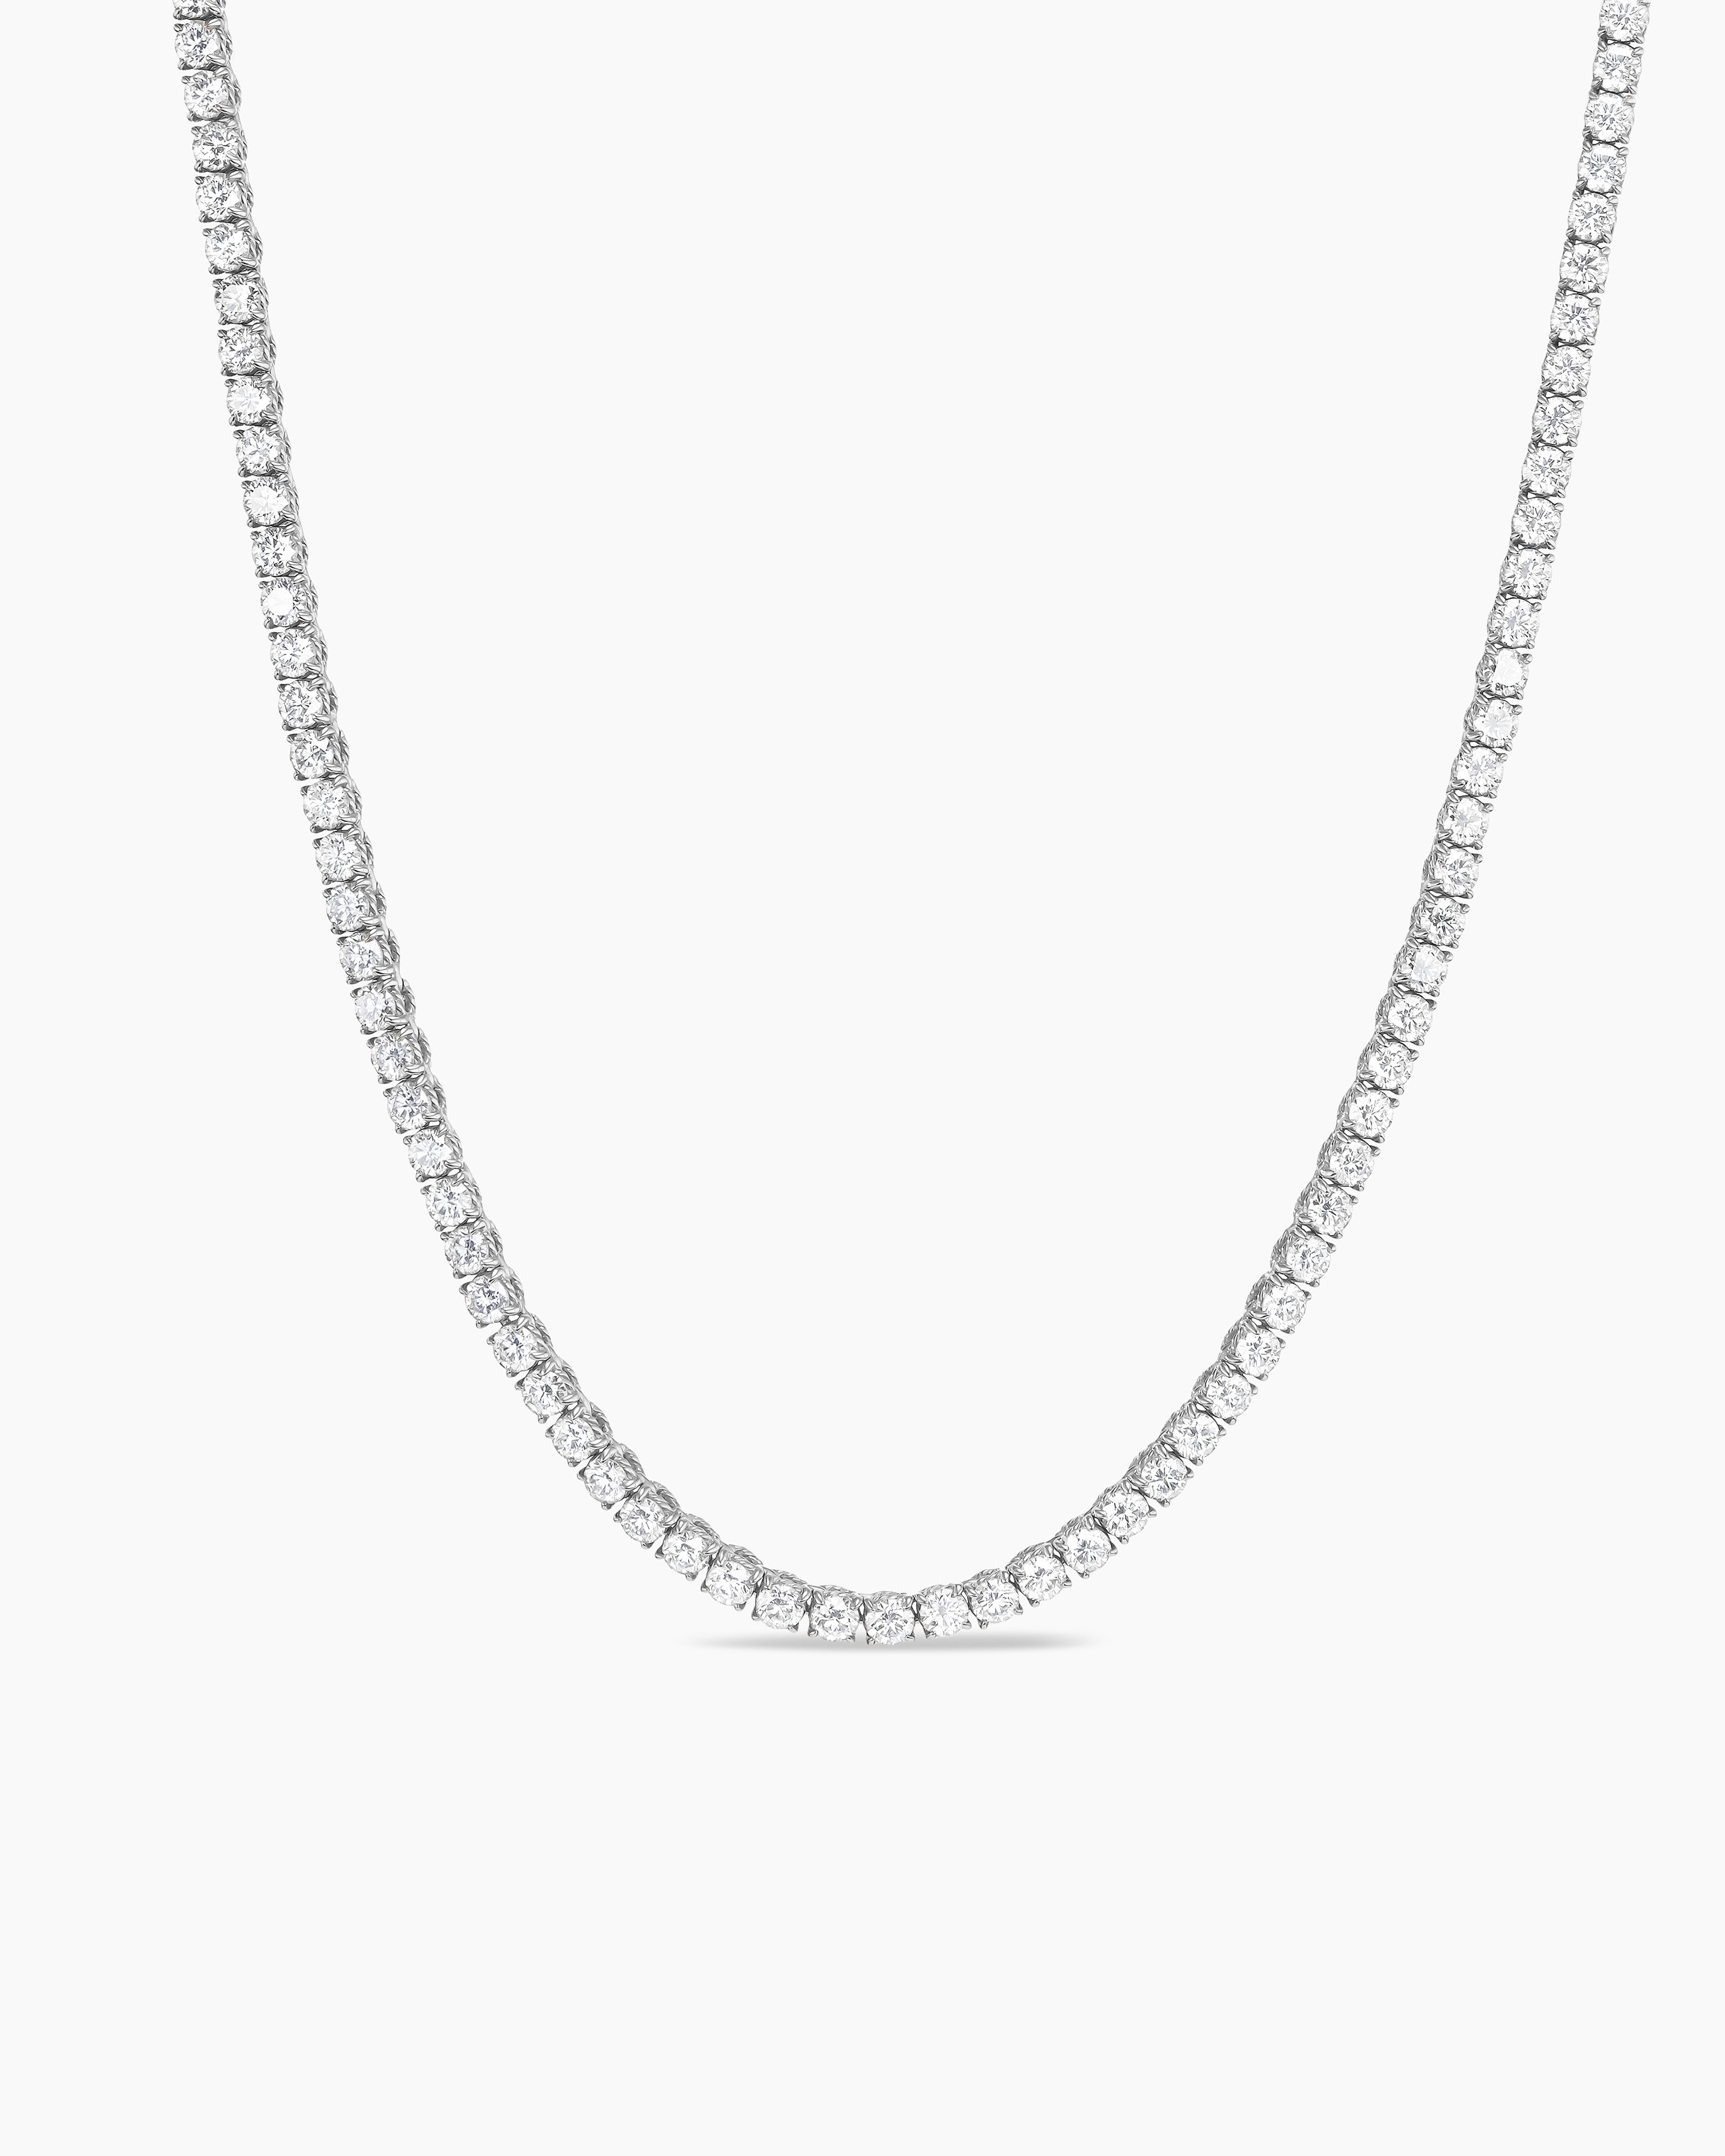 Diamond Tennis Necklace - The Clear Cut Collection